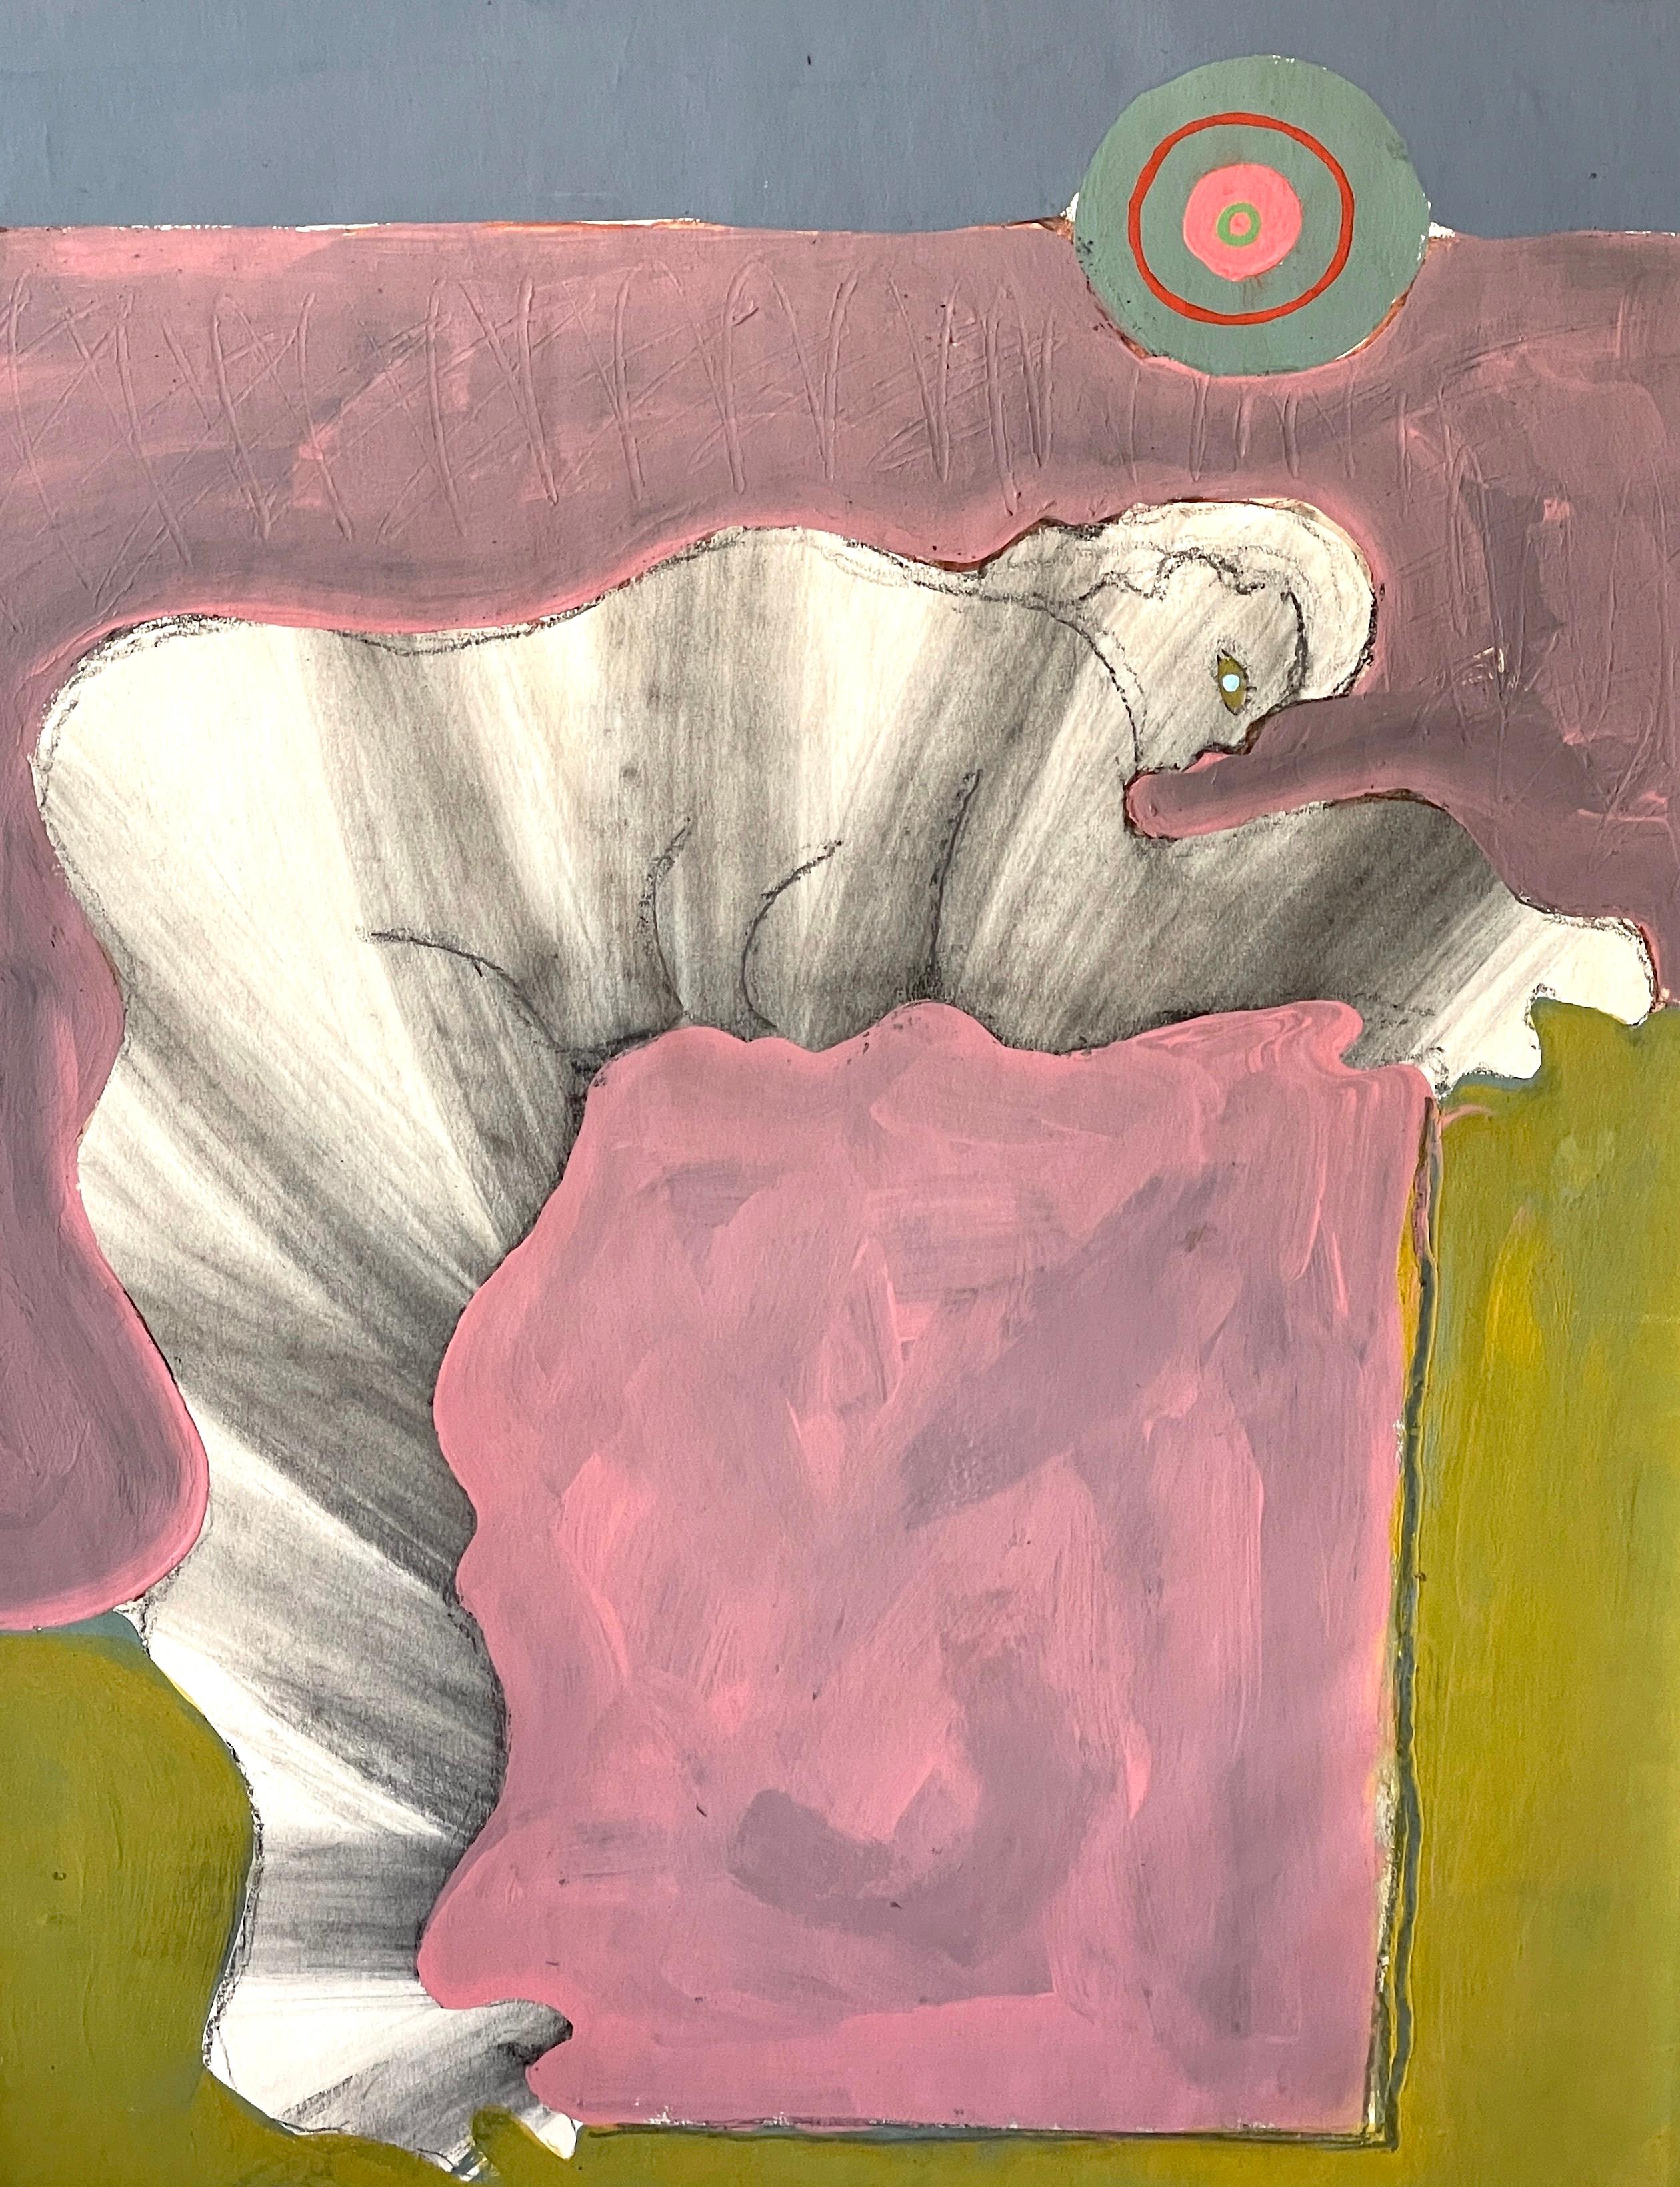 Silvered 'Study of Human Form' Oil/Mixed Media on Paper, 1960s by Douglas D. Peden For Sale